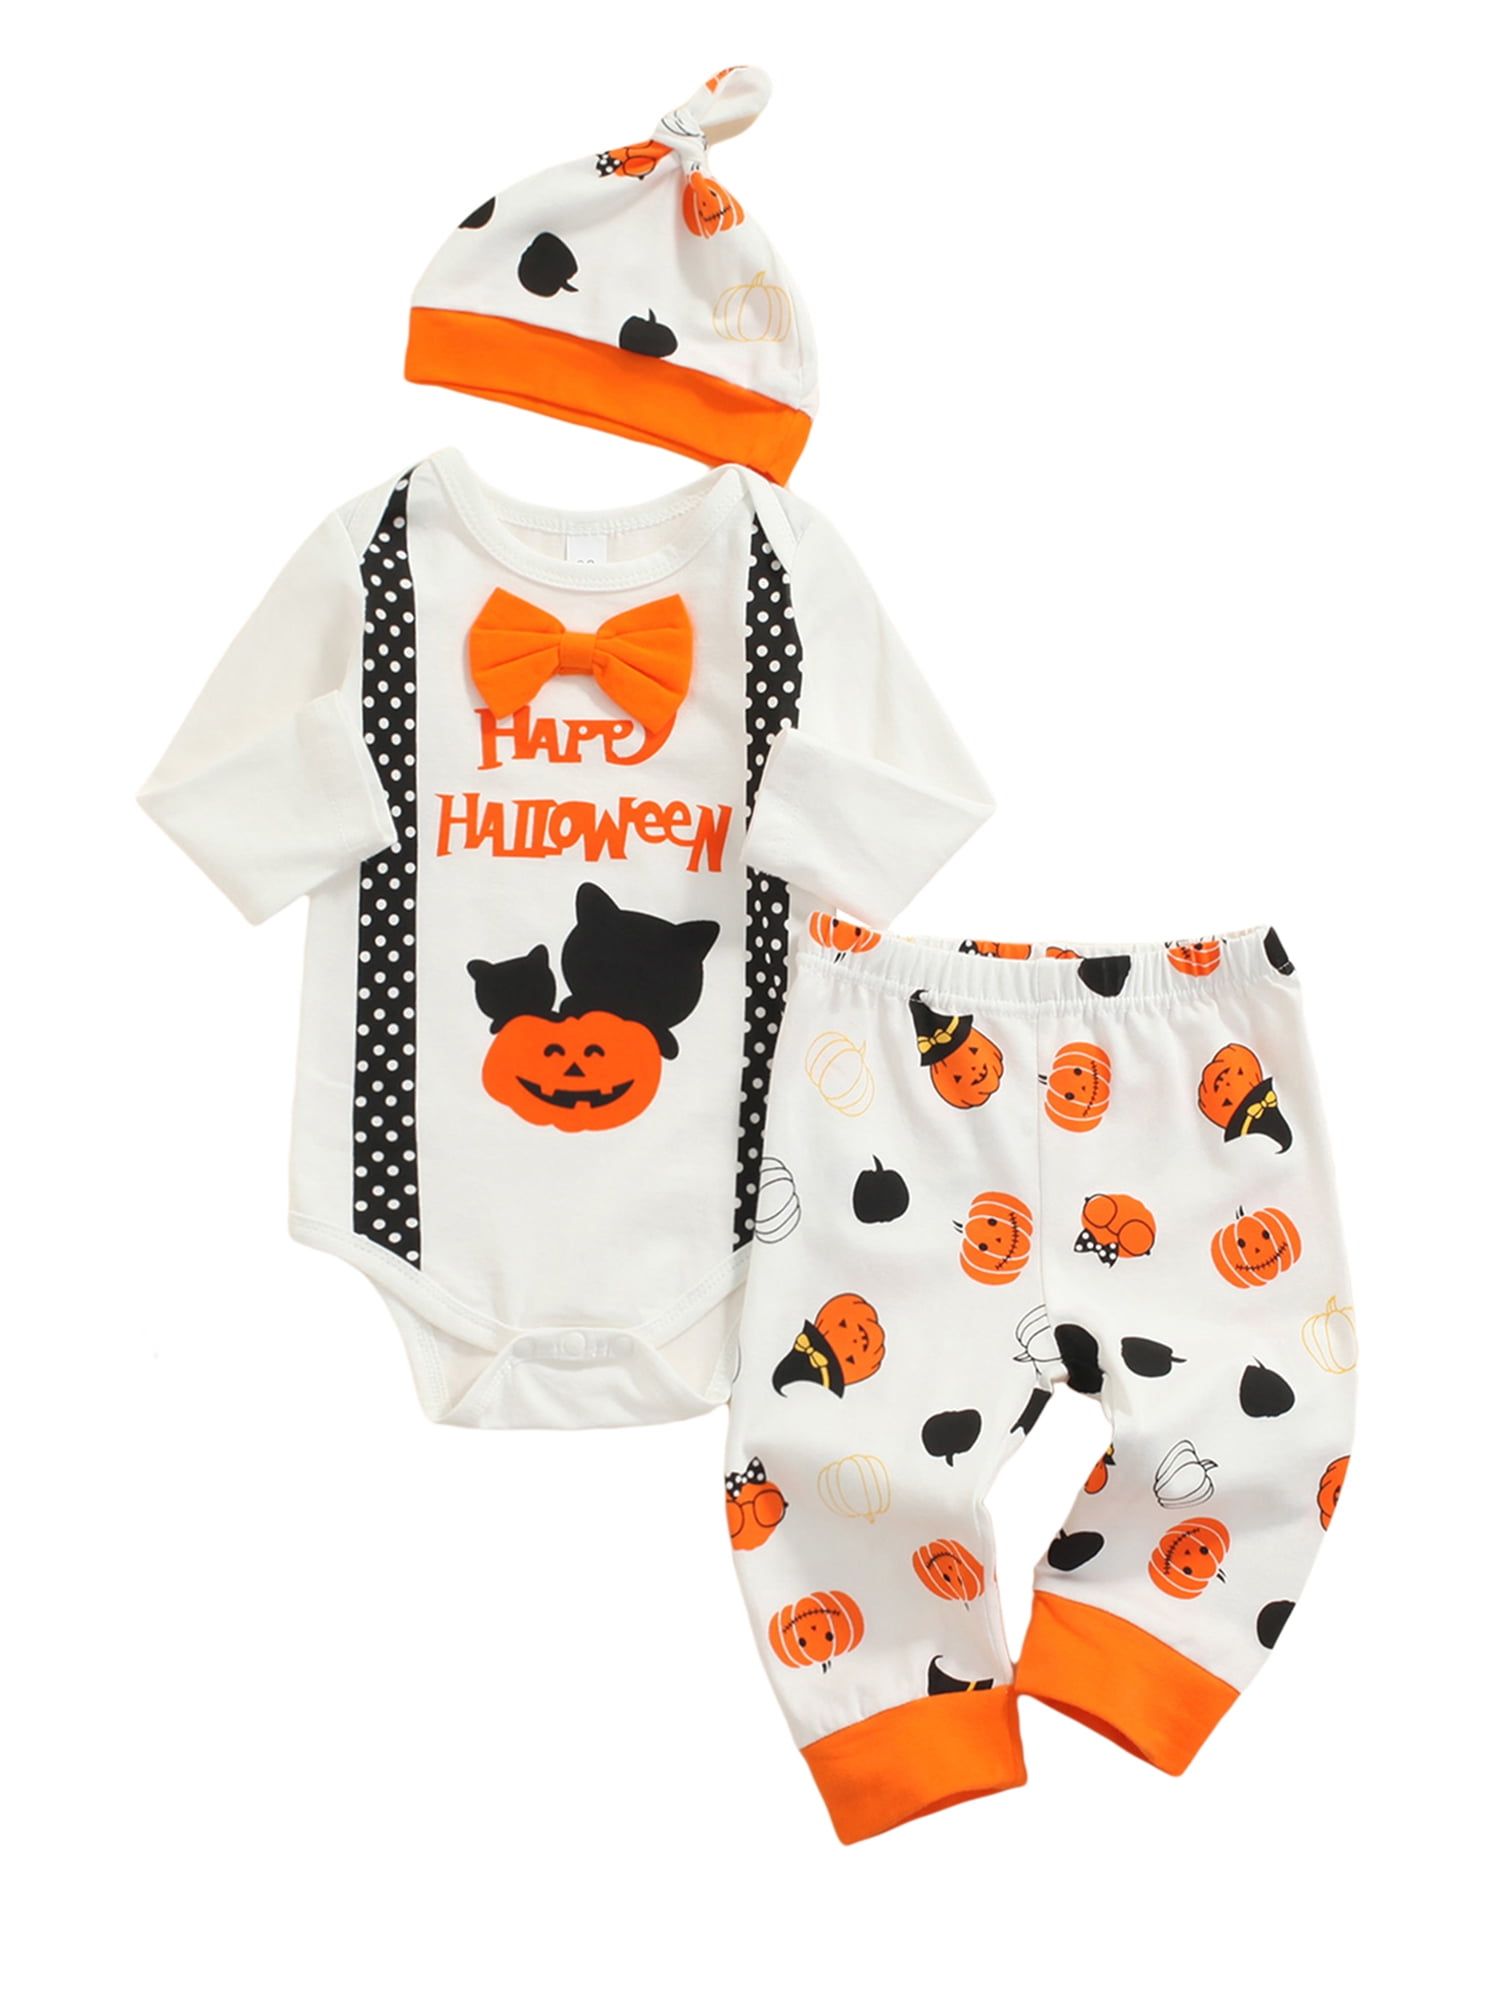 New! George SPOT The Dog Baby Unisex Romper Suit All in One Outfit 3-6 Months 